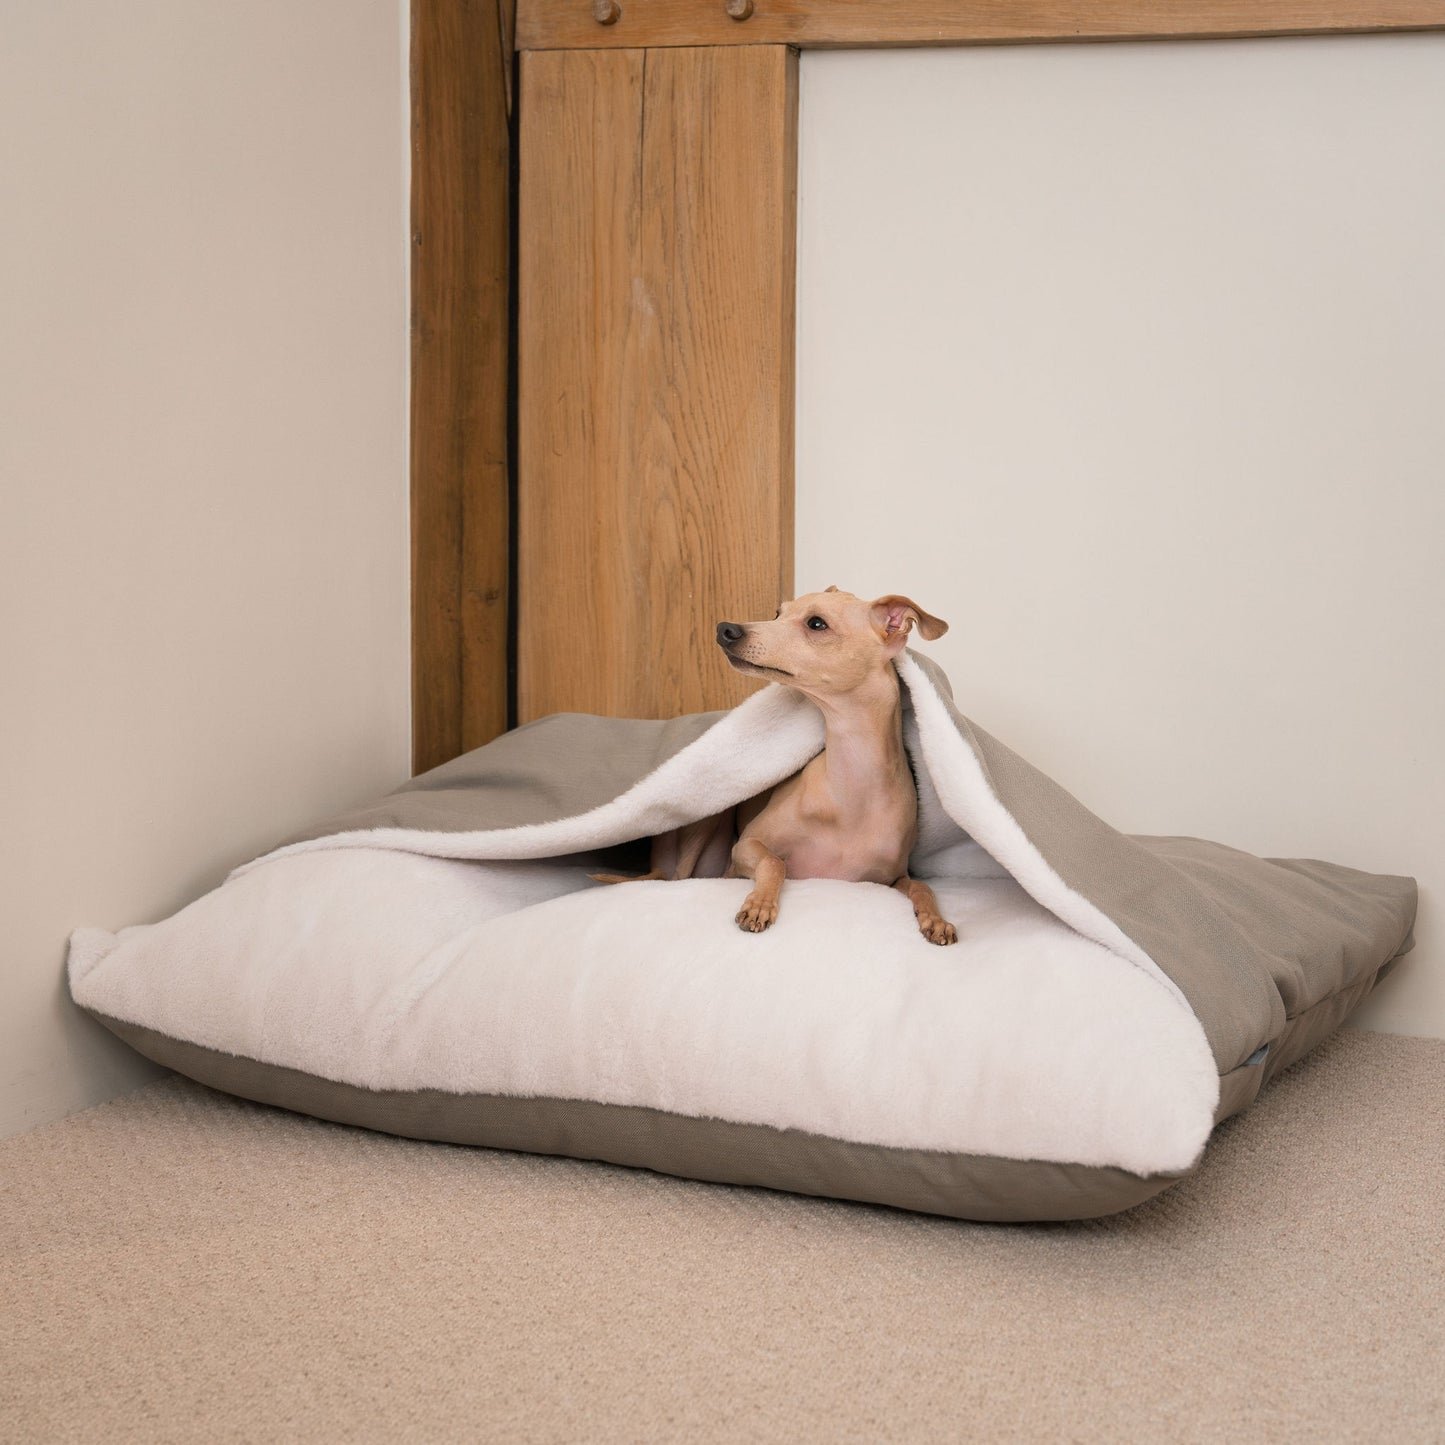 Luxury Savanna Sleepy Burrow, The Perfect bed For a Pet to Burrow. Available To Personalize In Stunning Savanna Stone, Here at Lords & Labradors US